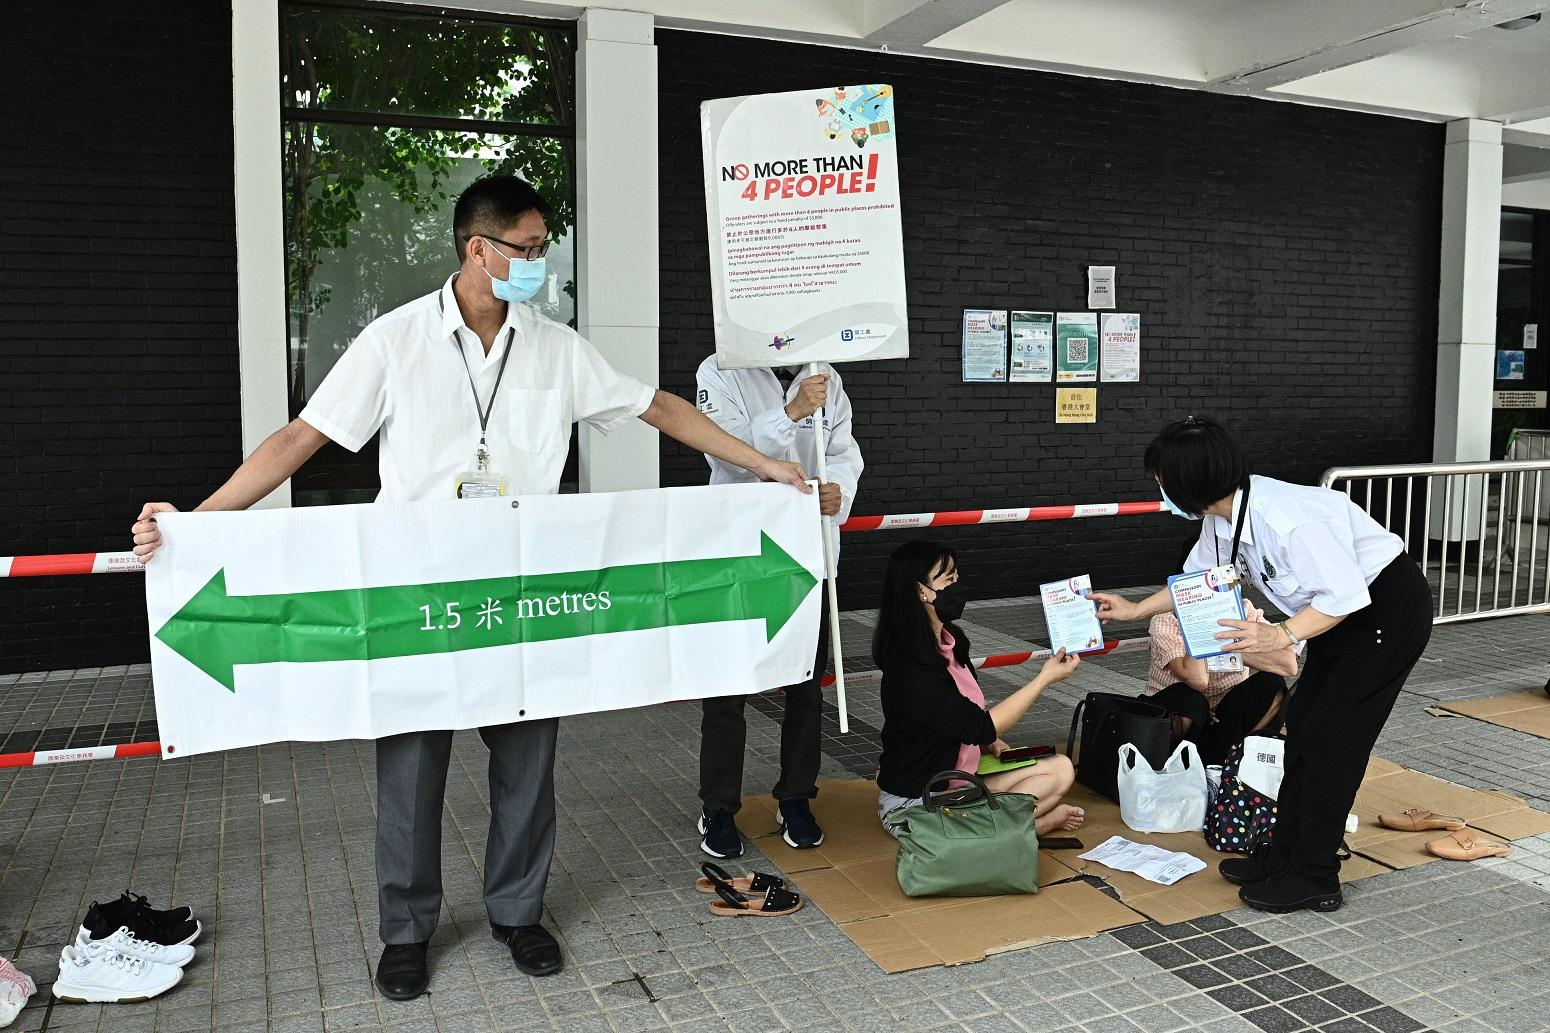 The Leisure and Cultural Services Department (LCSD) stepped up patrols at venues under its management today (May 9), ensuring venue users abide by the anti-epidemic regulations. Photo shows LCSD officers asking venue users to observe the legal requirements and giving them promotional leaflets about the regulations at Hong Kong City Hall.